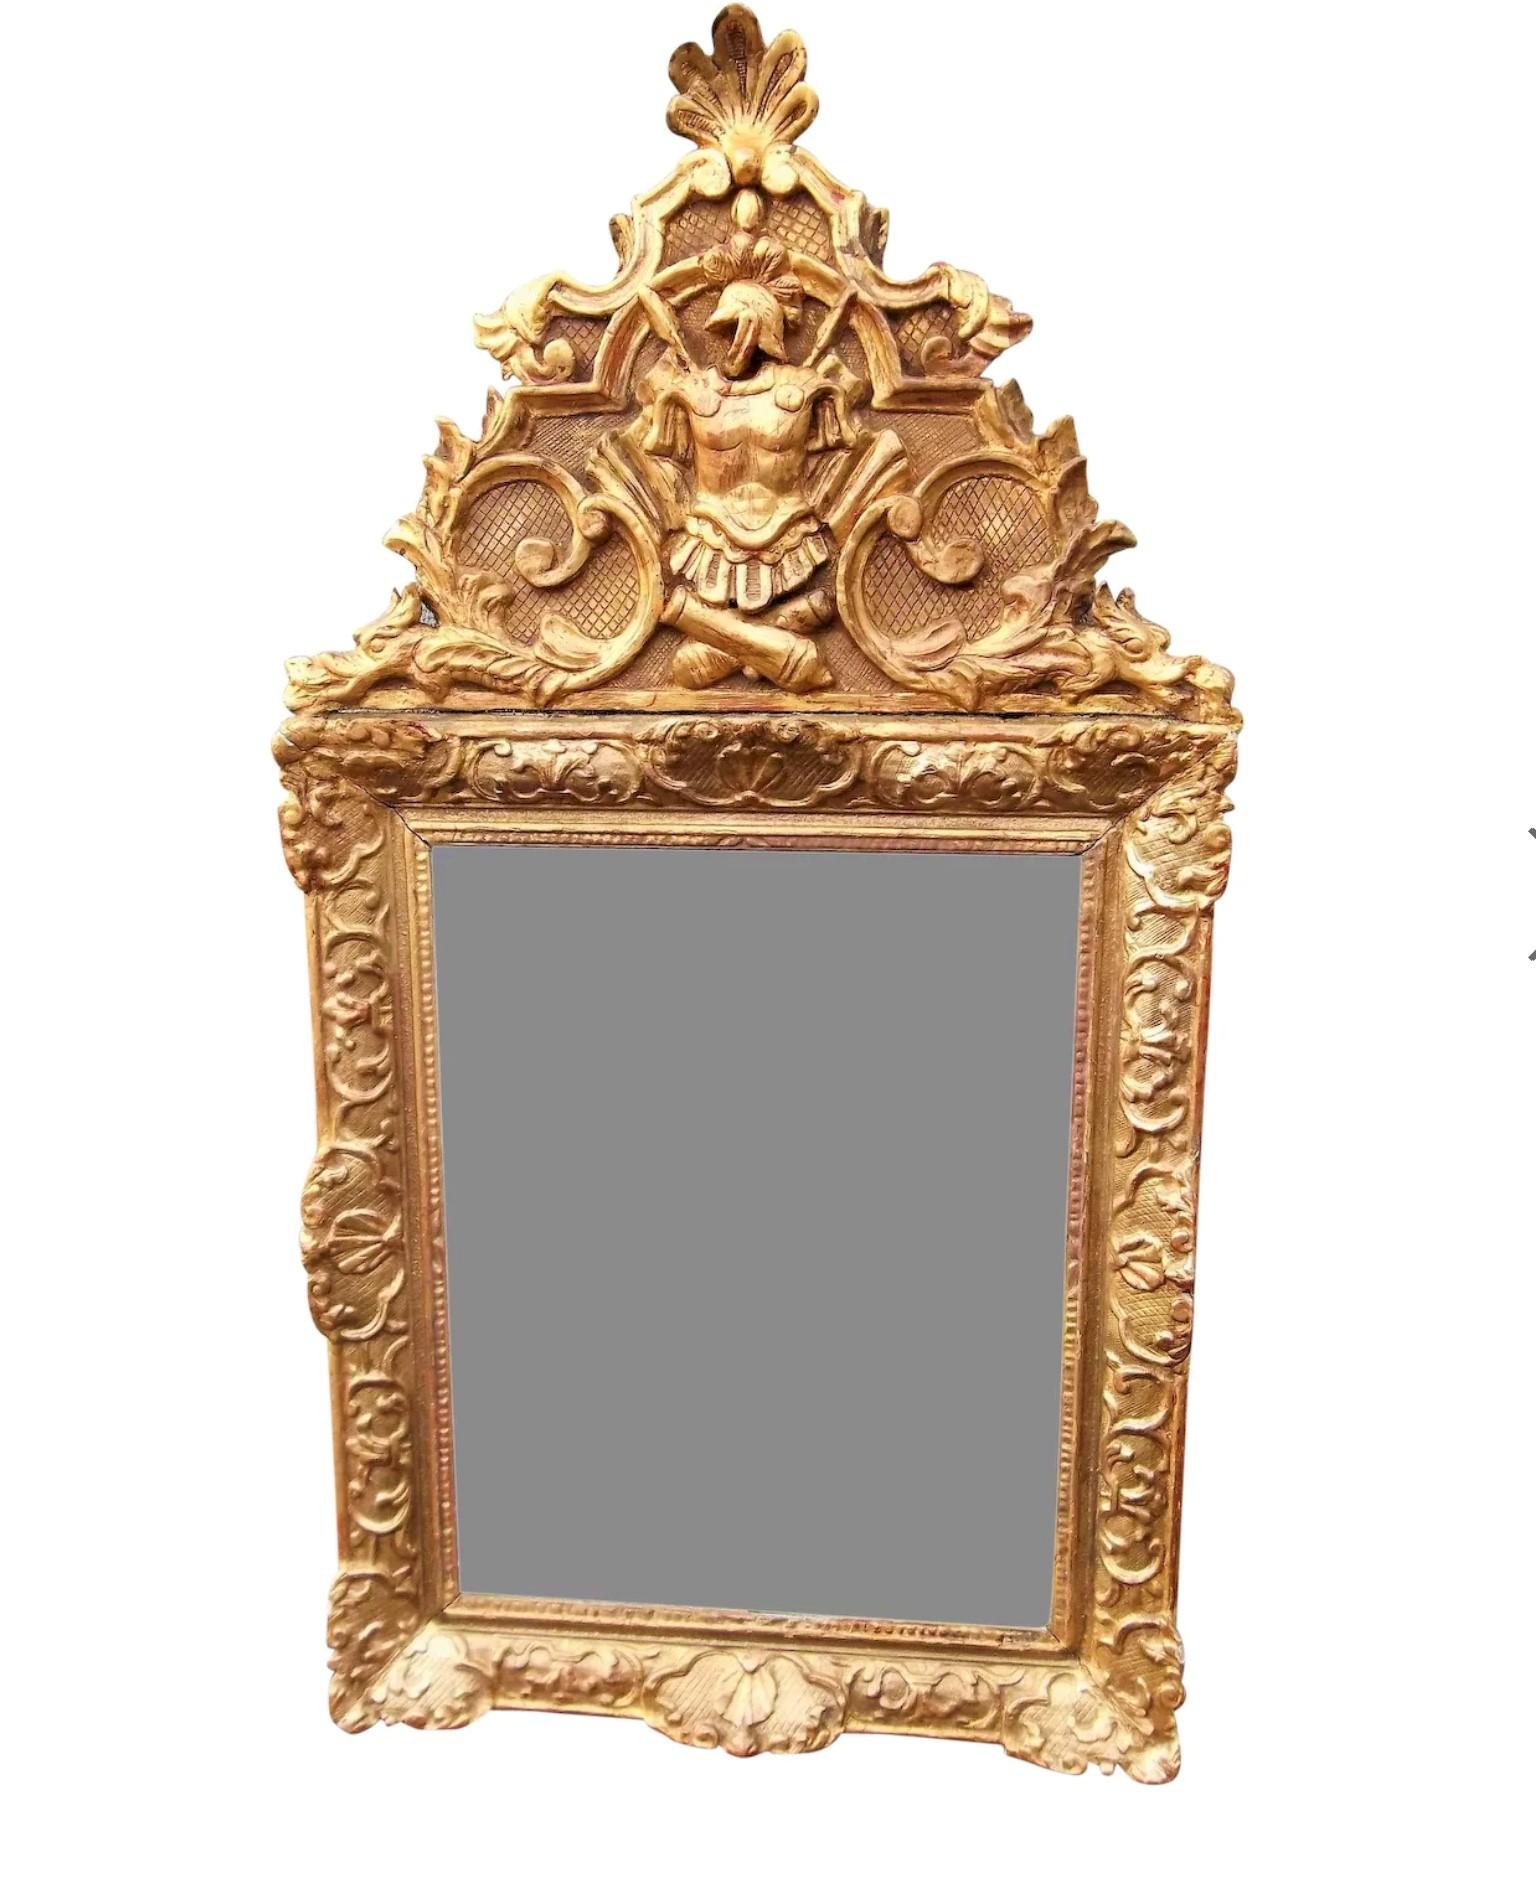 French Regence to Louis XV Style Giltwood Mirror with Roman Trophy